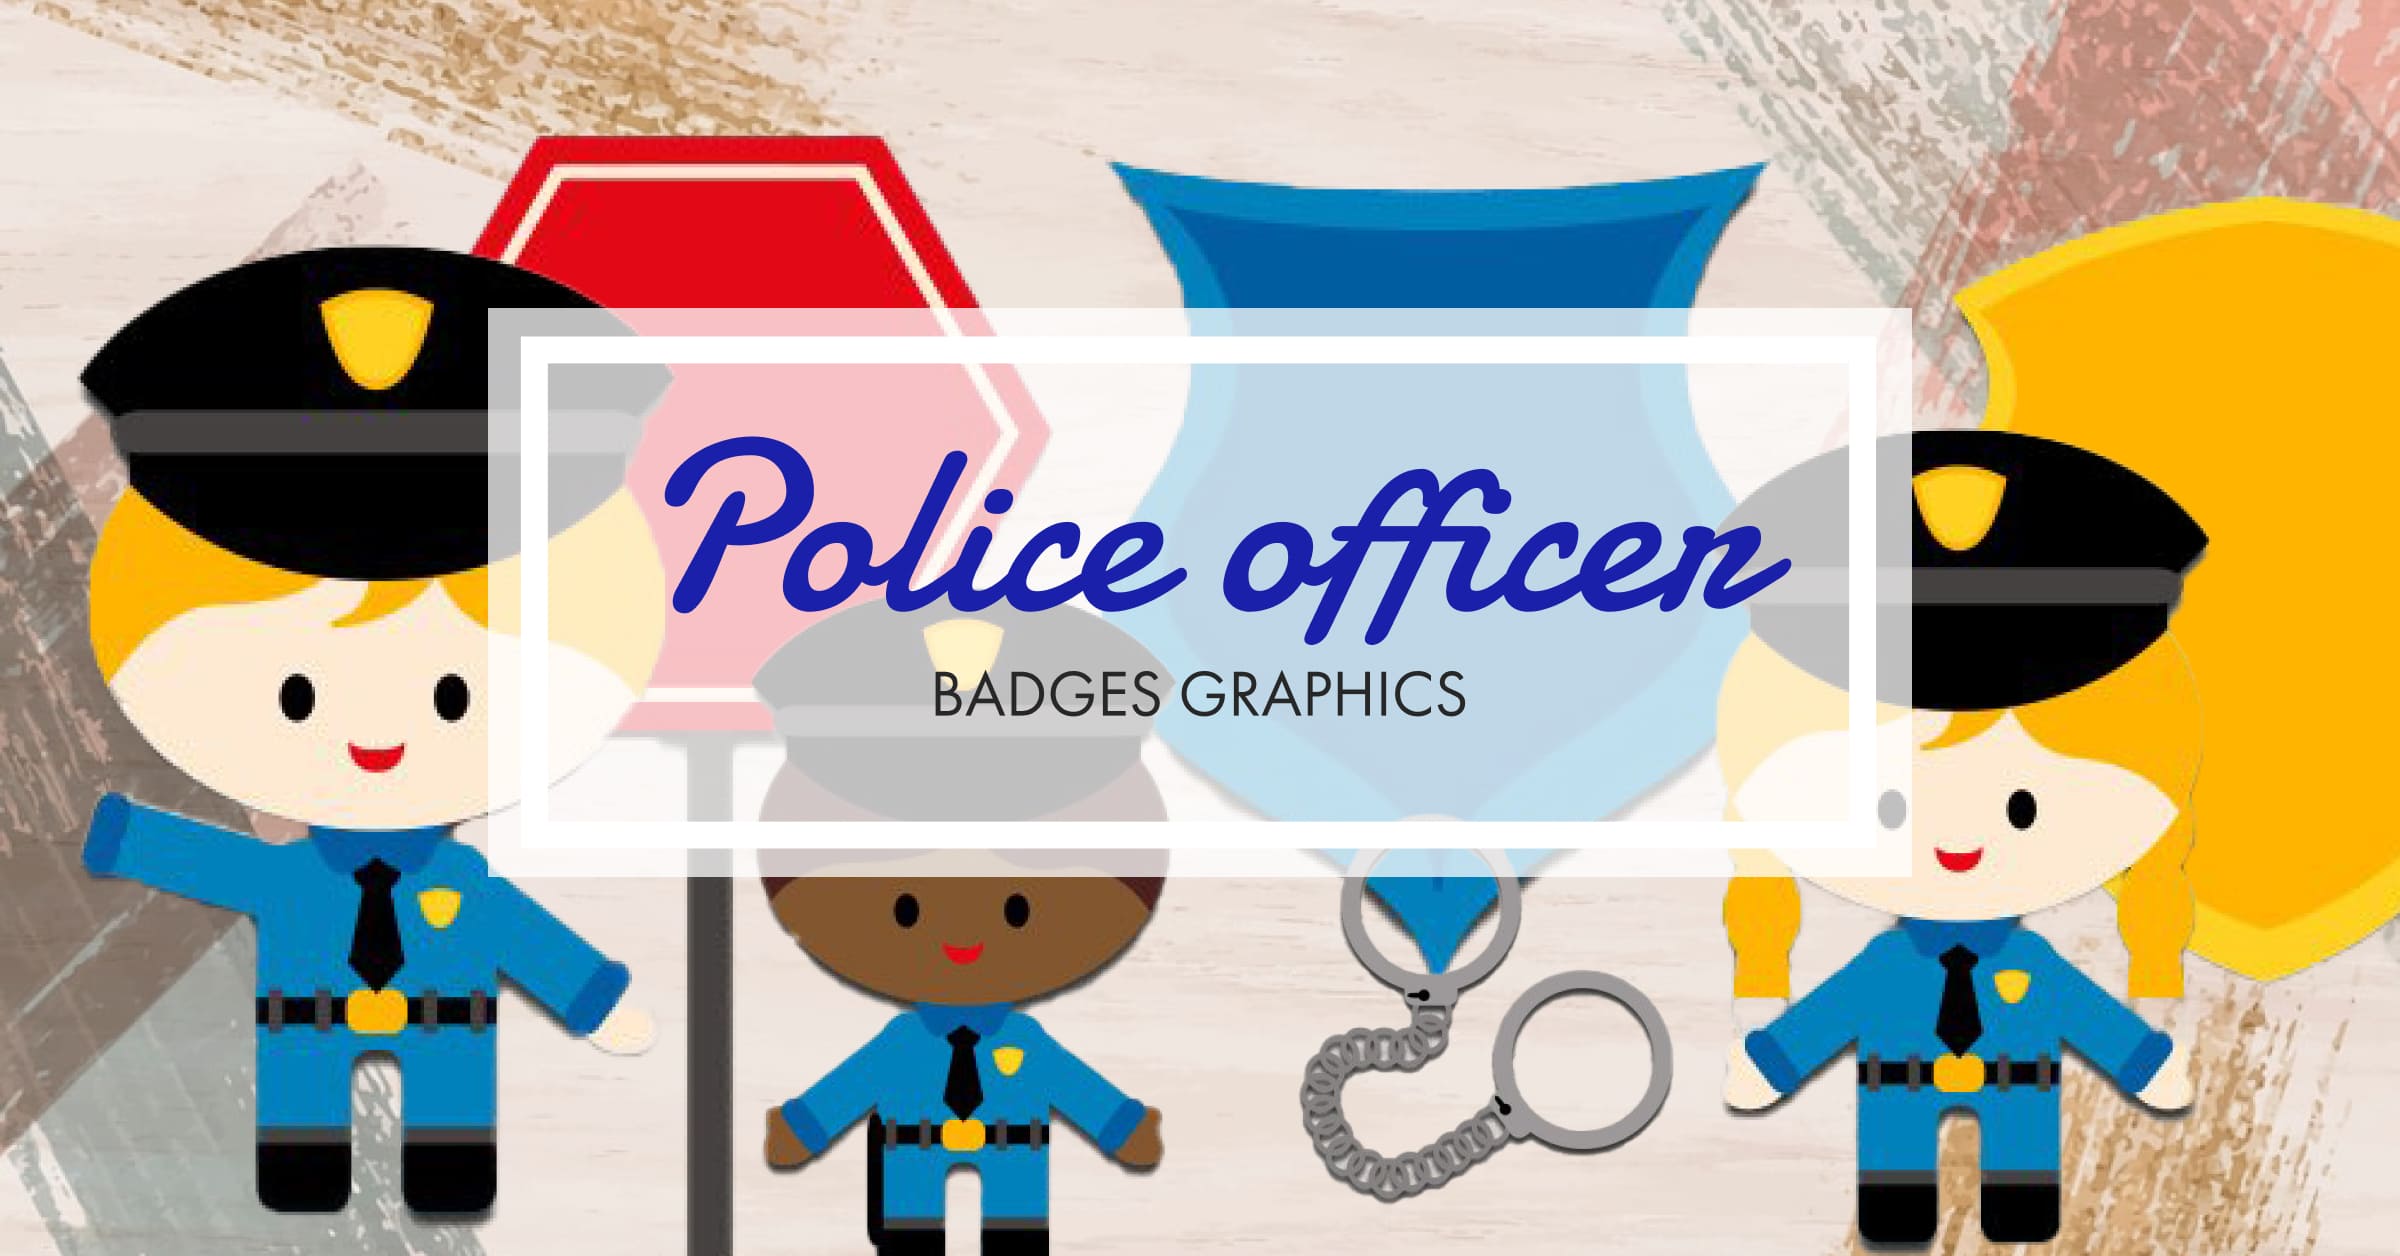 Police Officer - Policeman, Police Woman, Badges Graphics - Facebook.